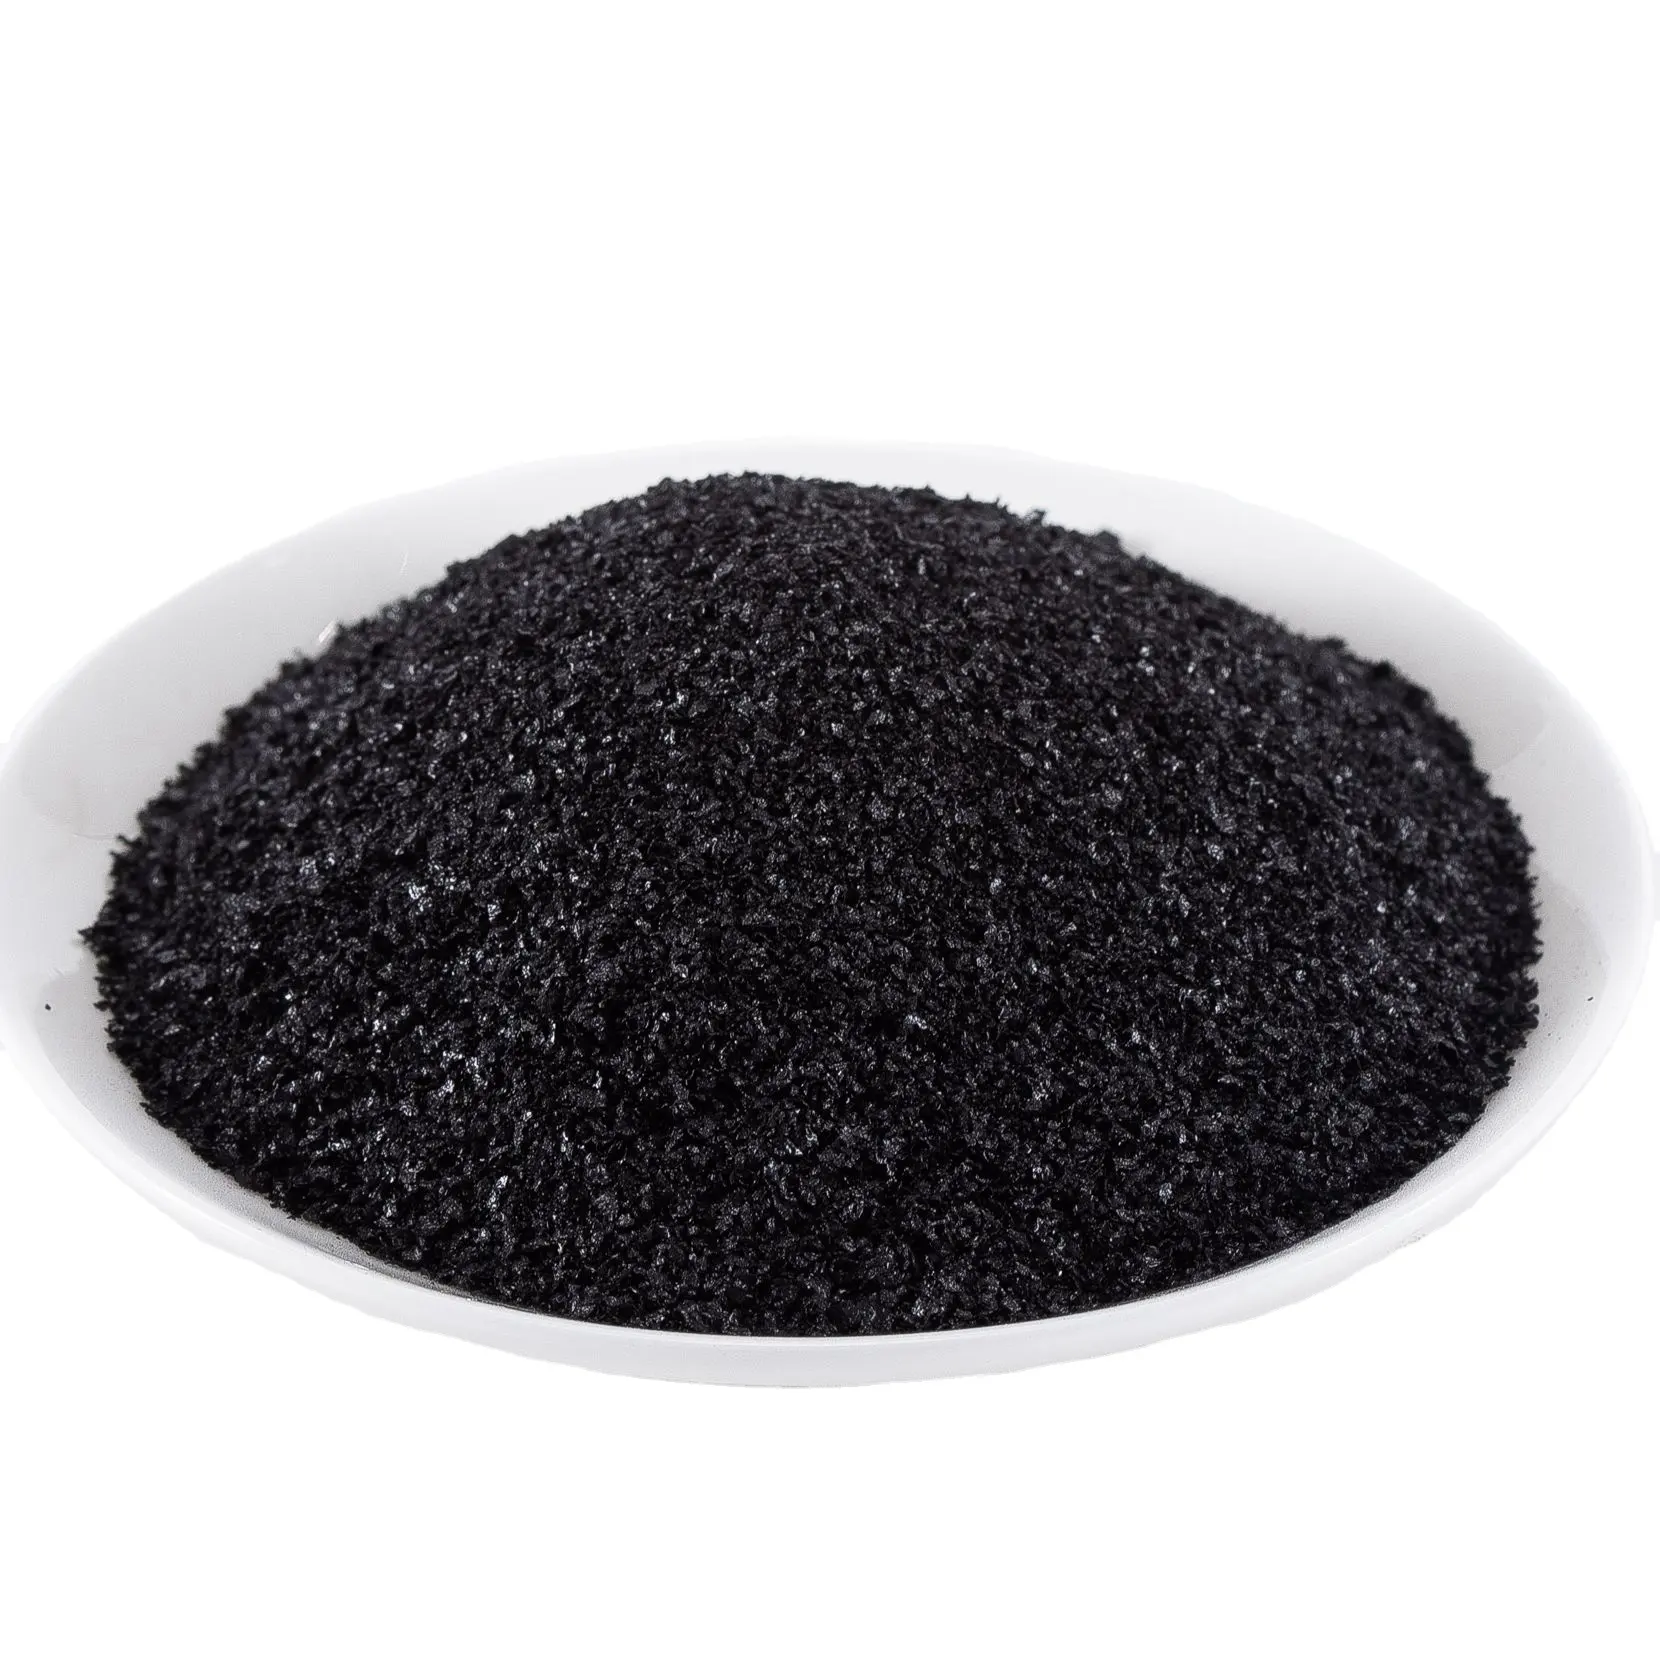 Hot Sale High Content Excellent Organic Fertilizer Wholesale Factory Price 10% Alginic Acid Seaweed Extract Flake